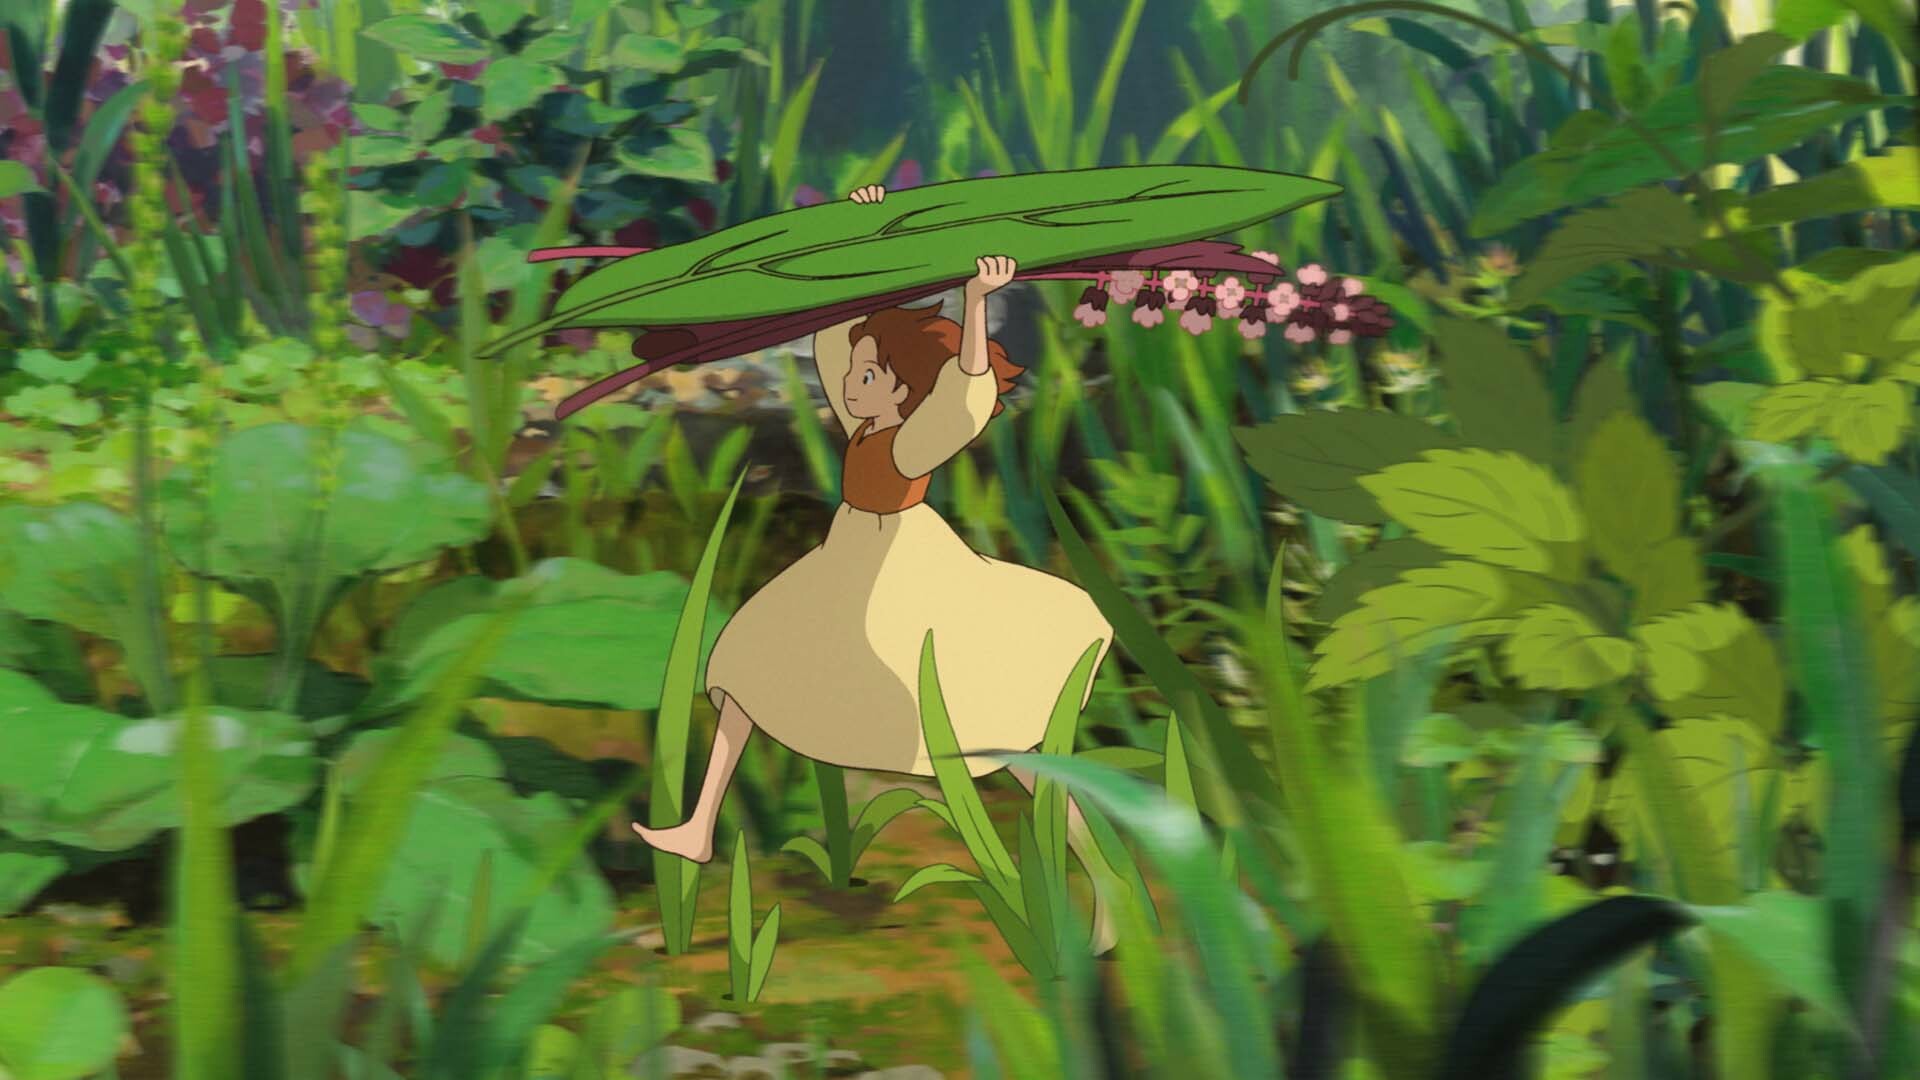 The Secret World of Arrietty: Based on the classic novel series The Borrowers by Mary Norton. 1920x1080 Full HD Background.